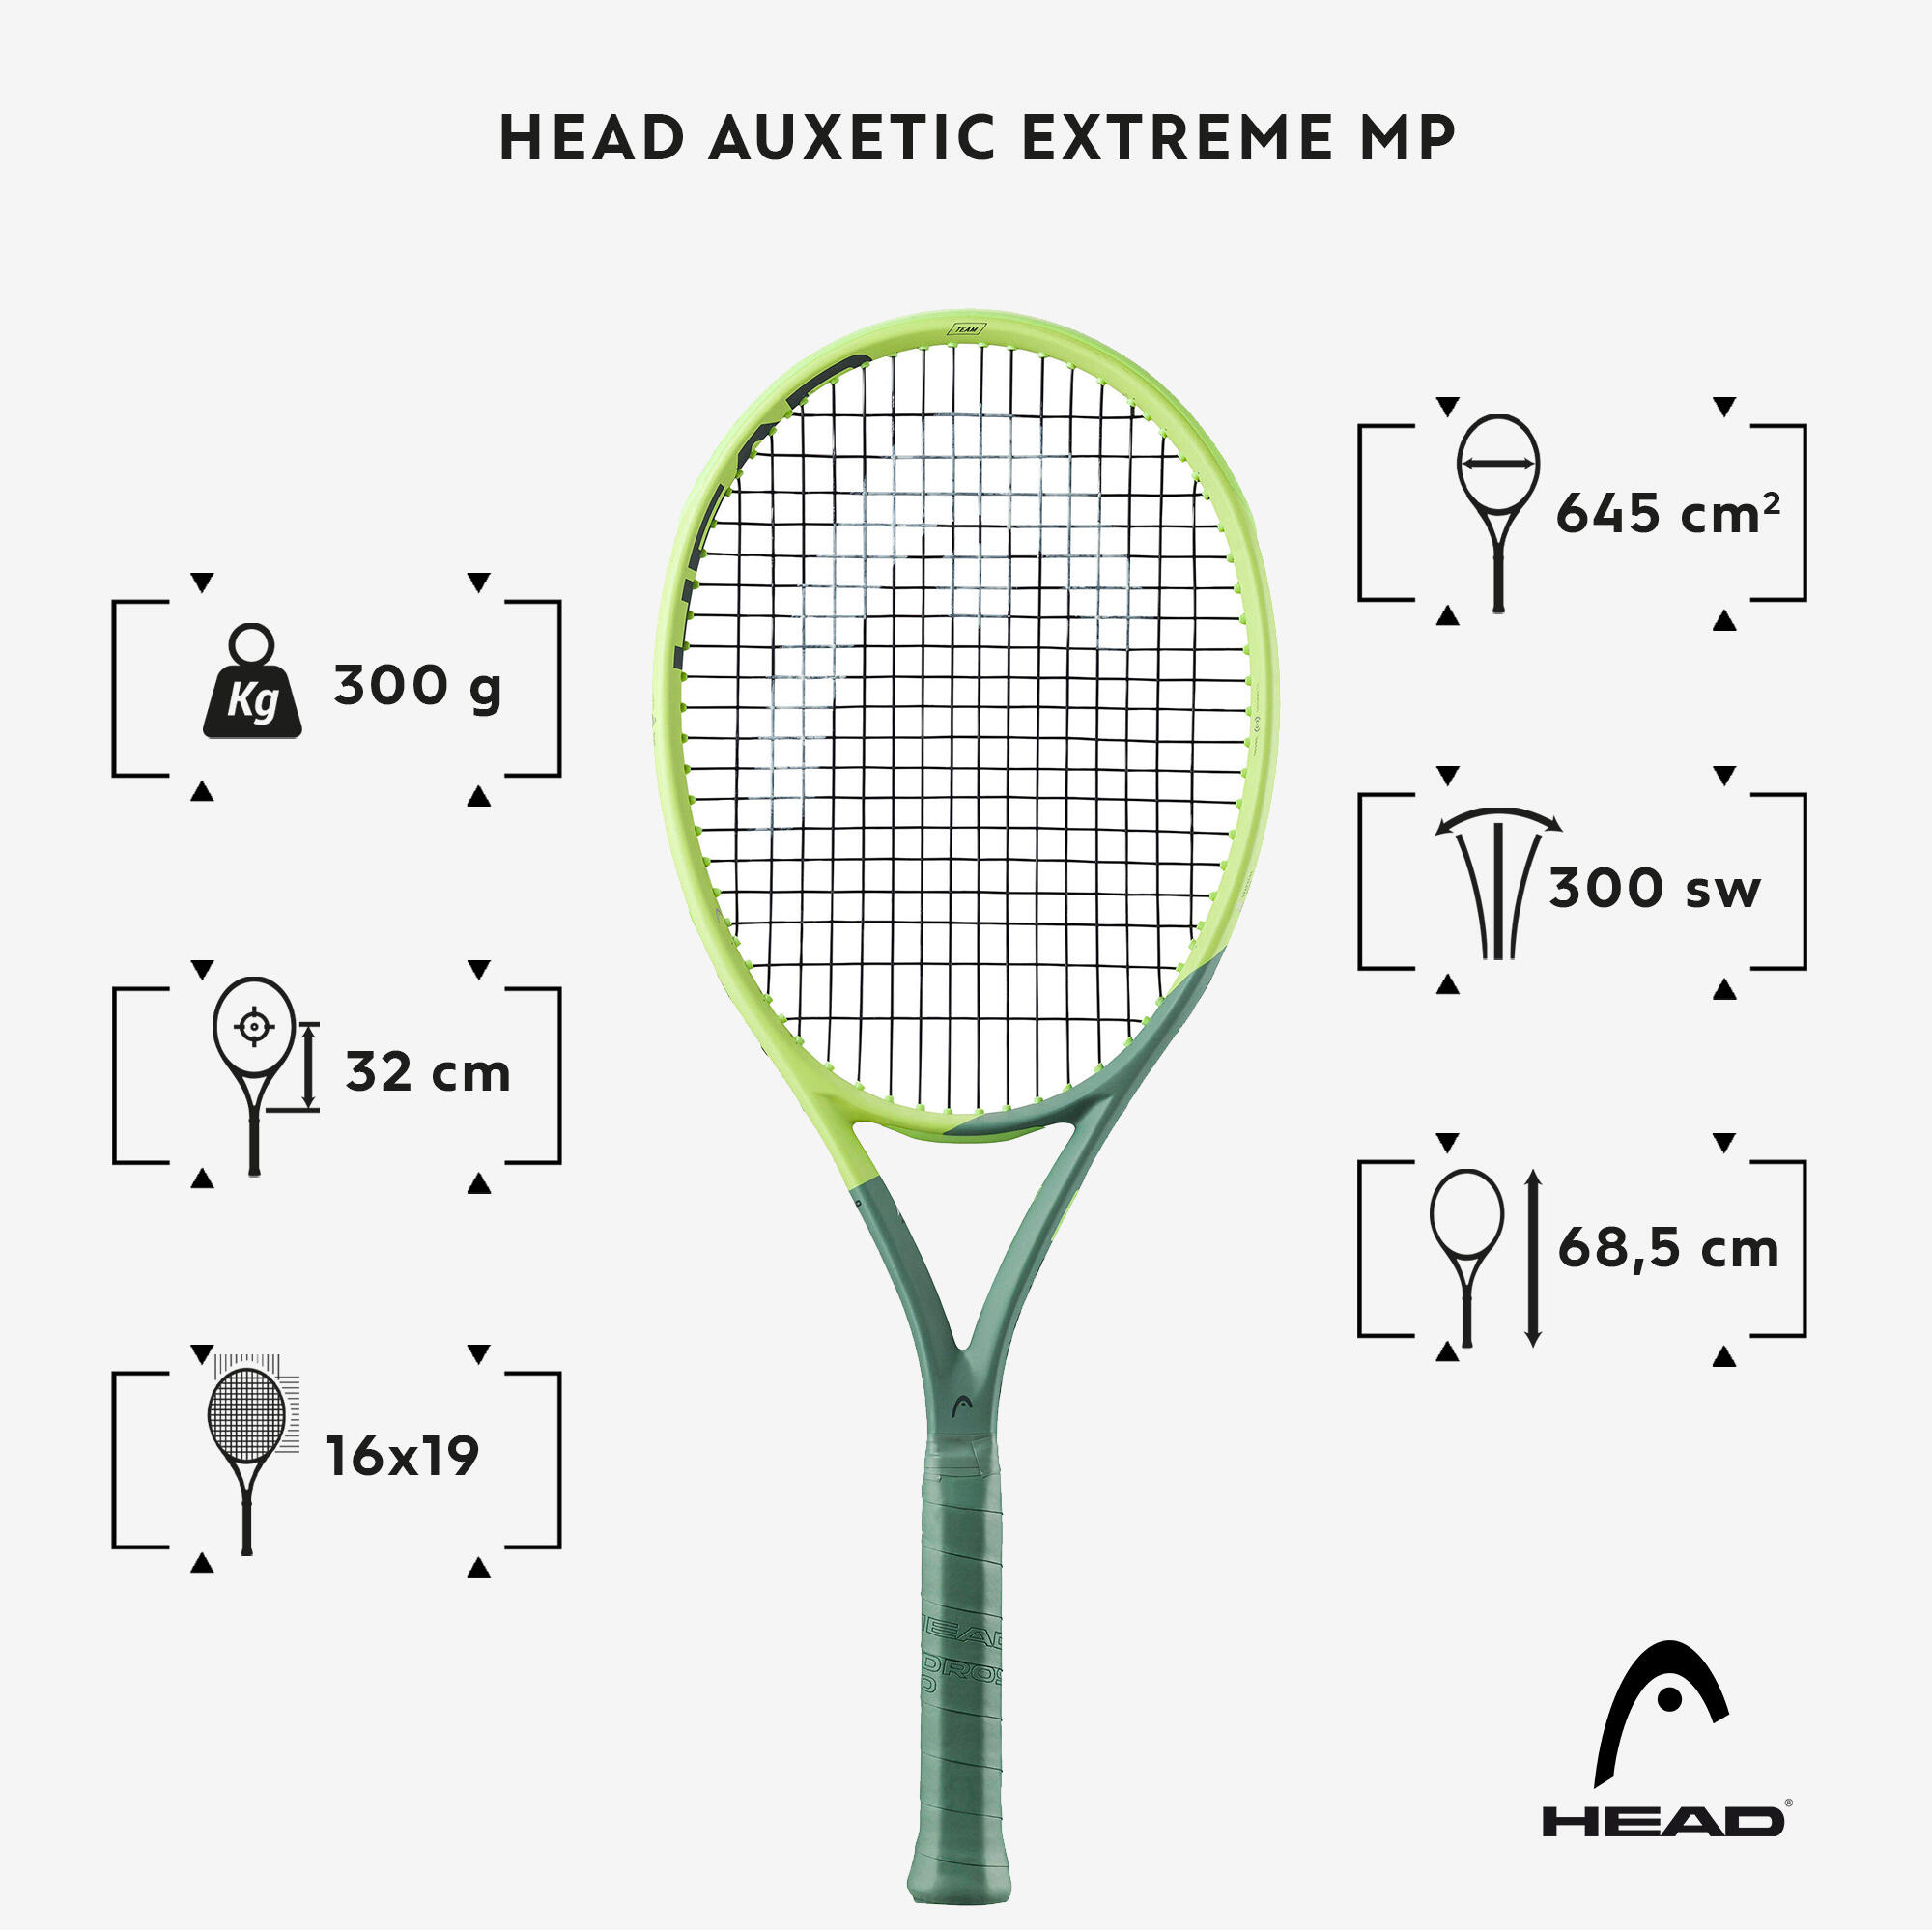 Adult Tennis Racket Auxetic Extreme MP 300 g- Grey/Yellow 2/9